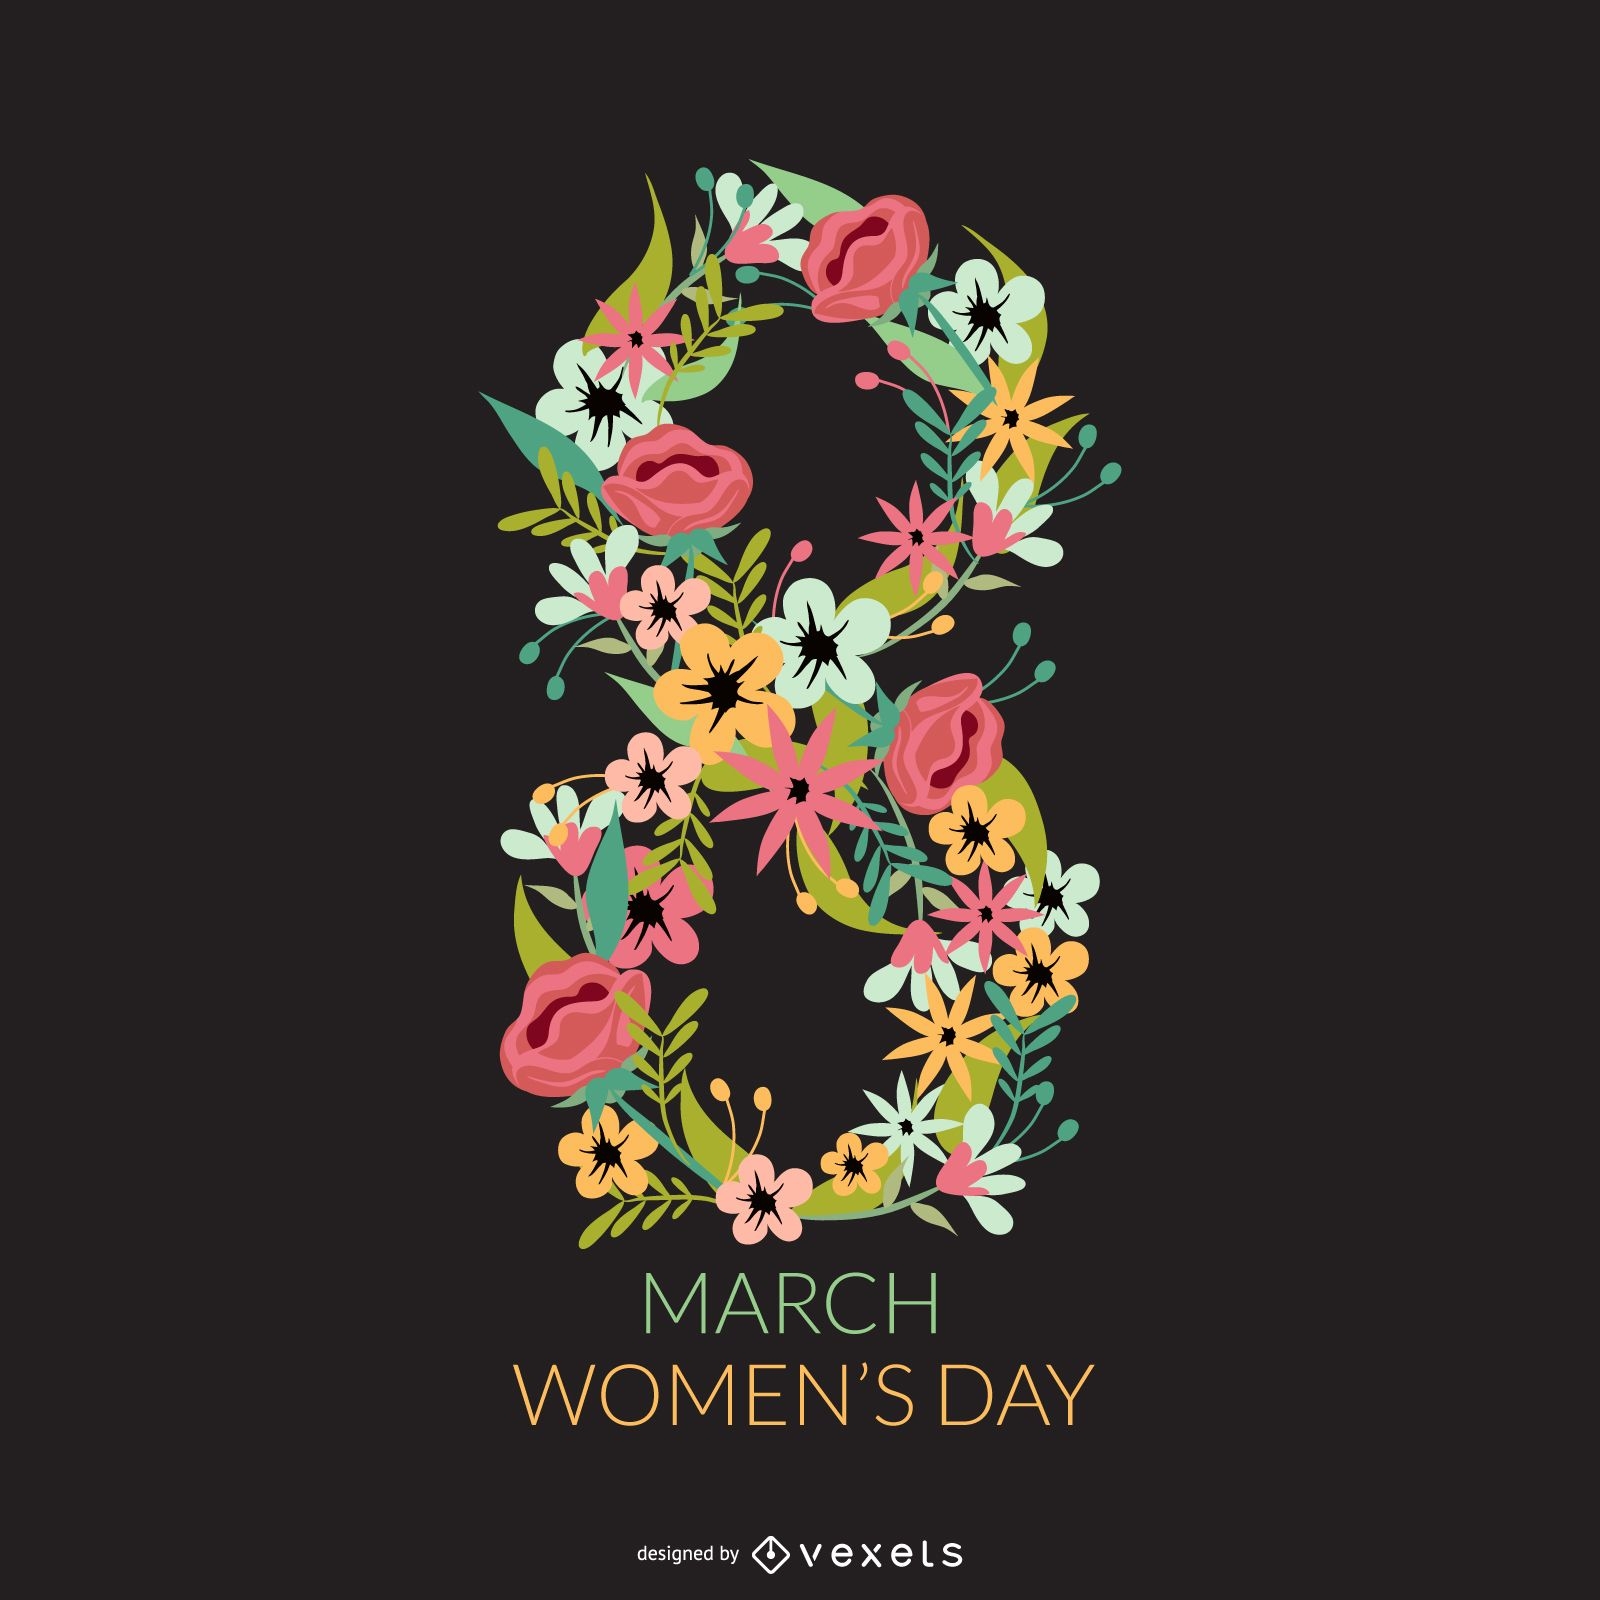 Floral Women's Day design